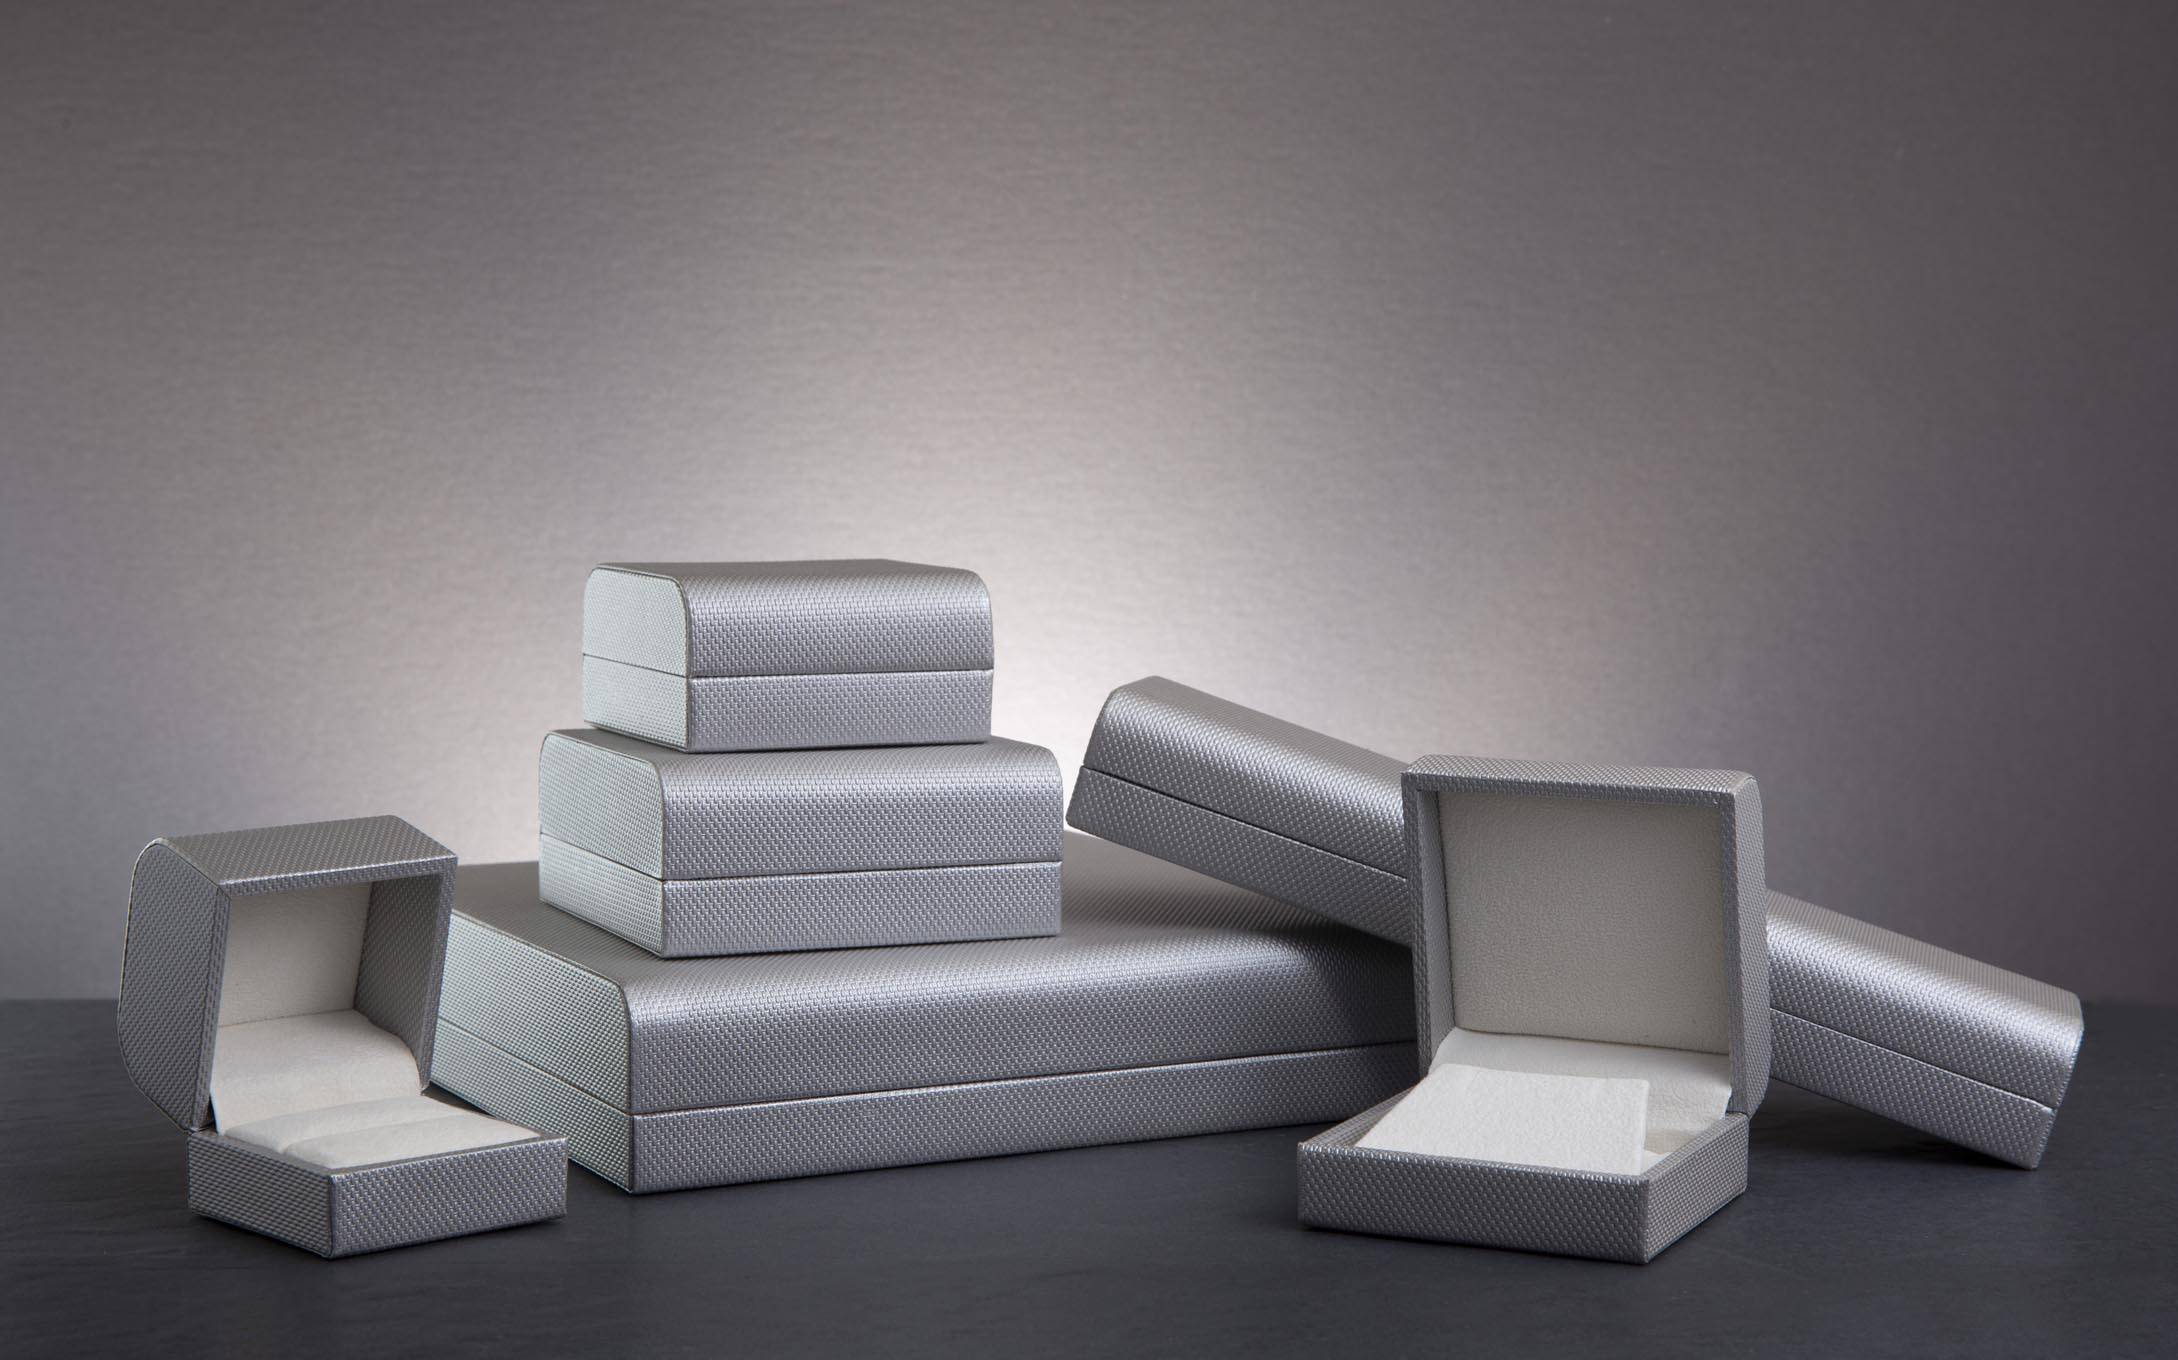 Jewelry Packaging Boxes Company in USA